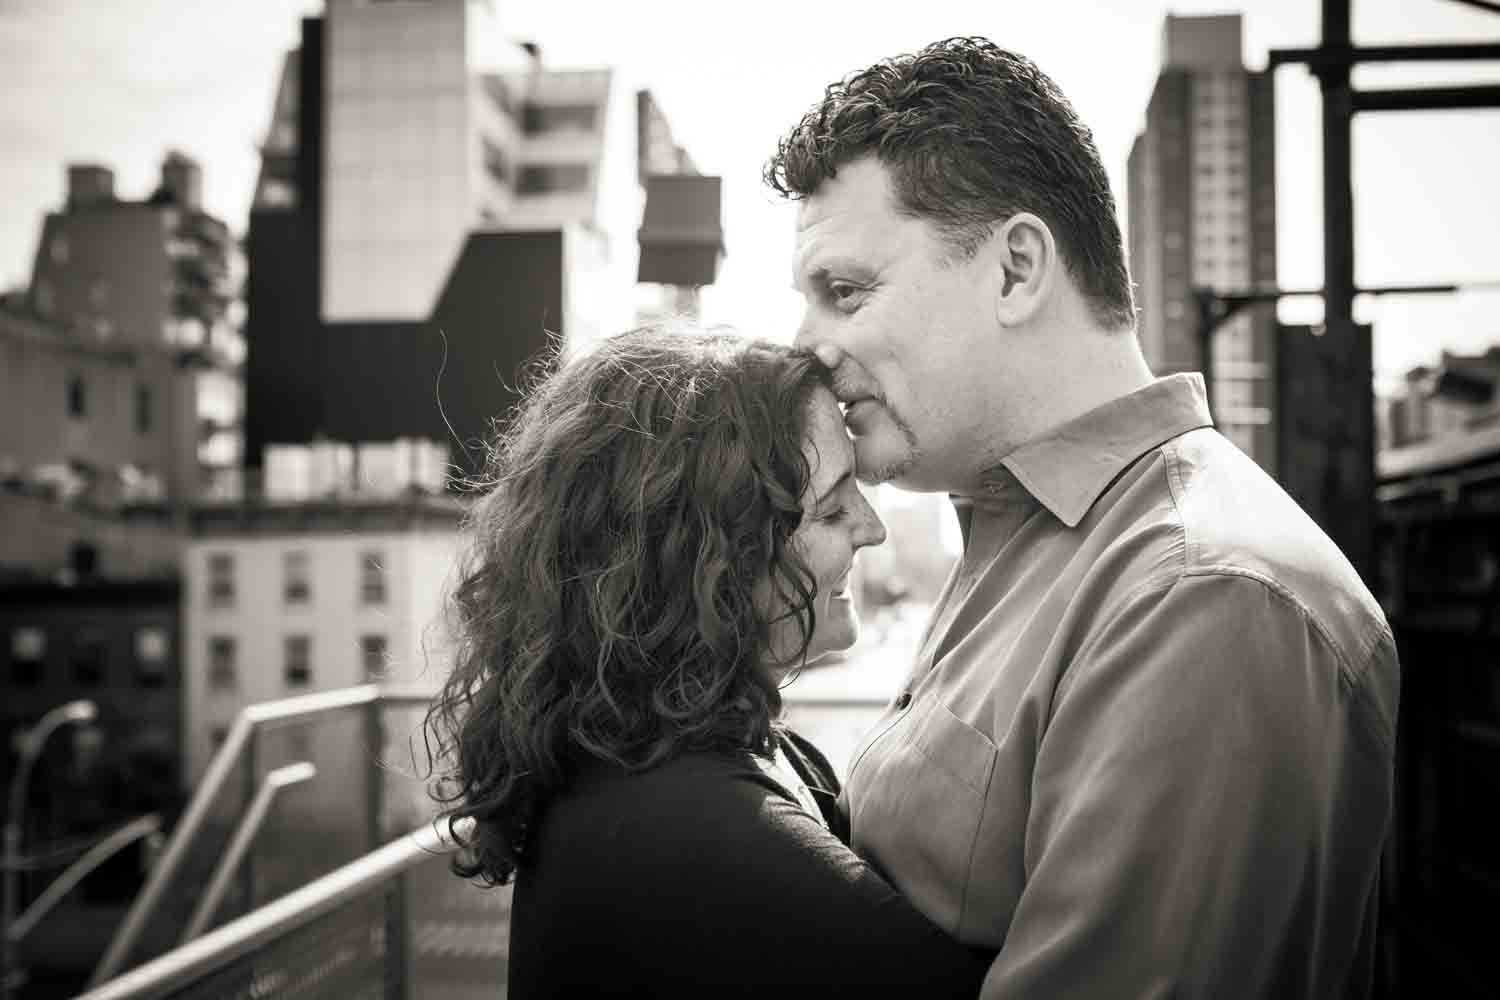 Black and white photo of man kissing woman on the forehead